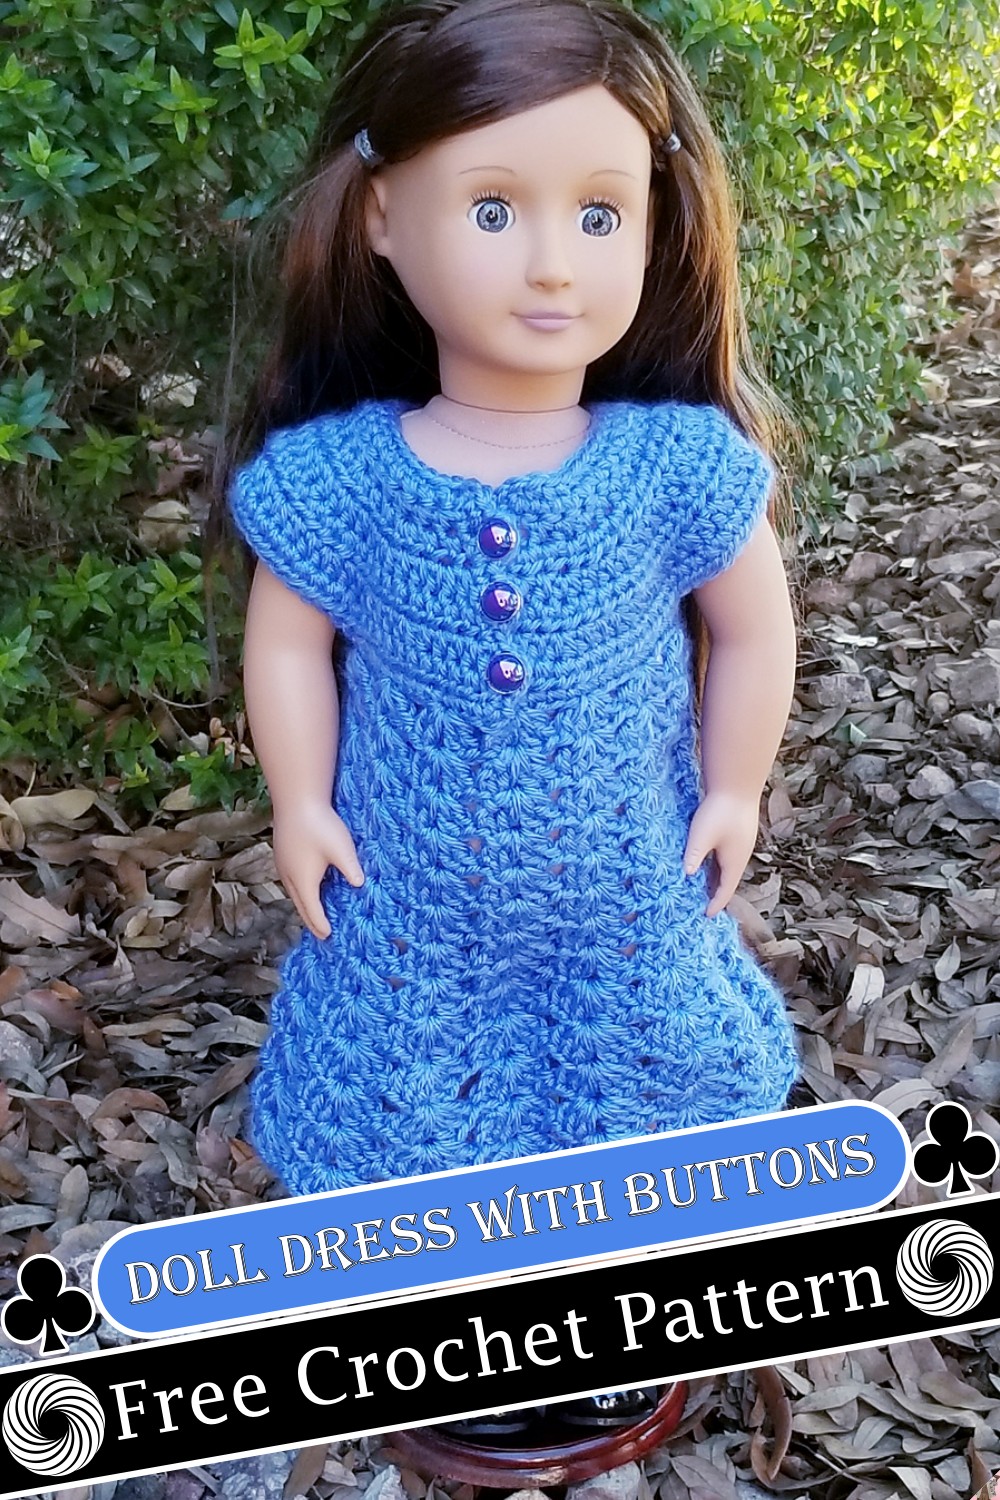 Doll Dress With Buttons